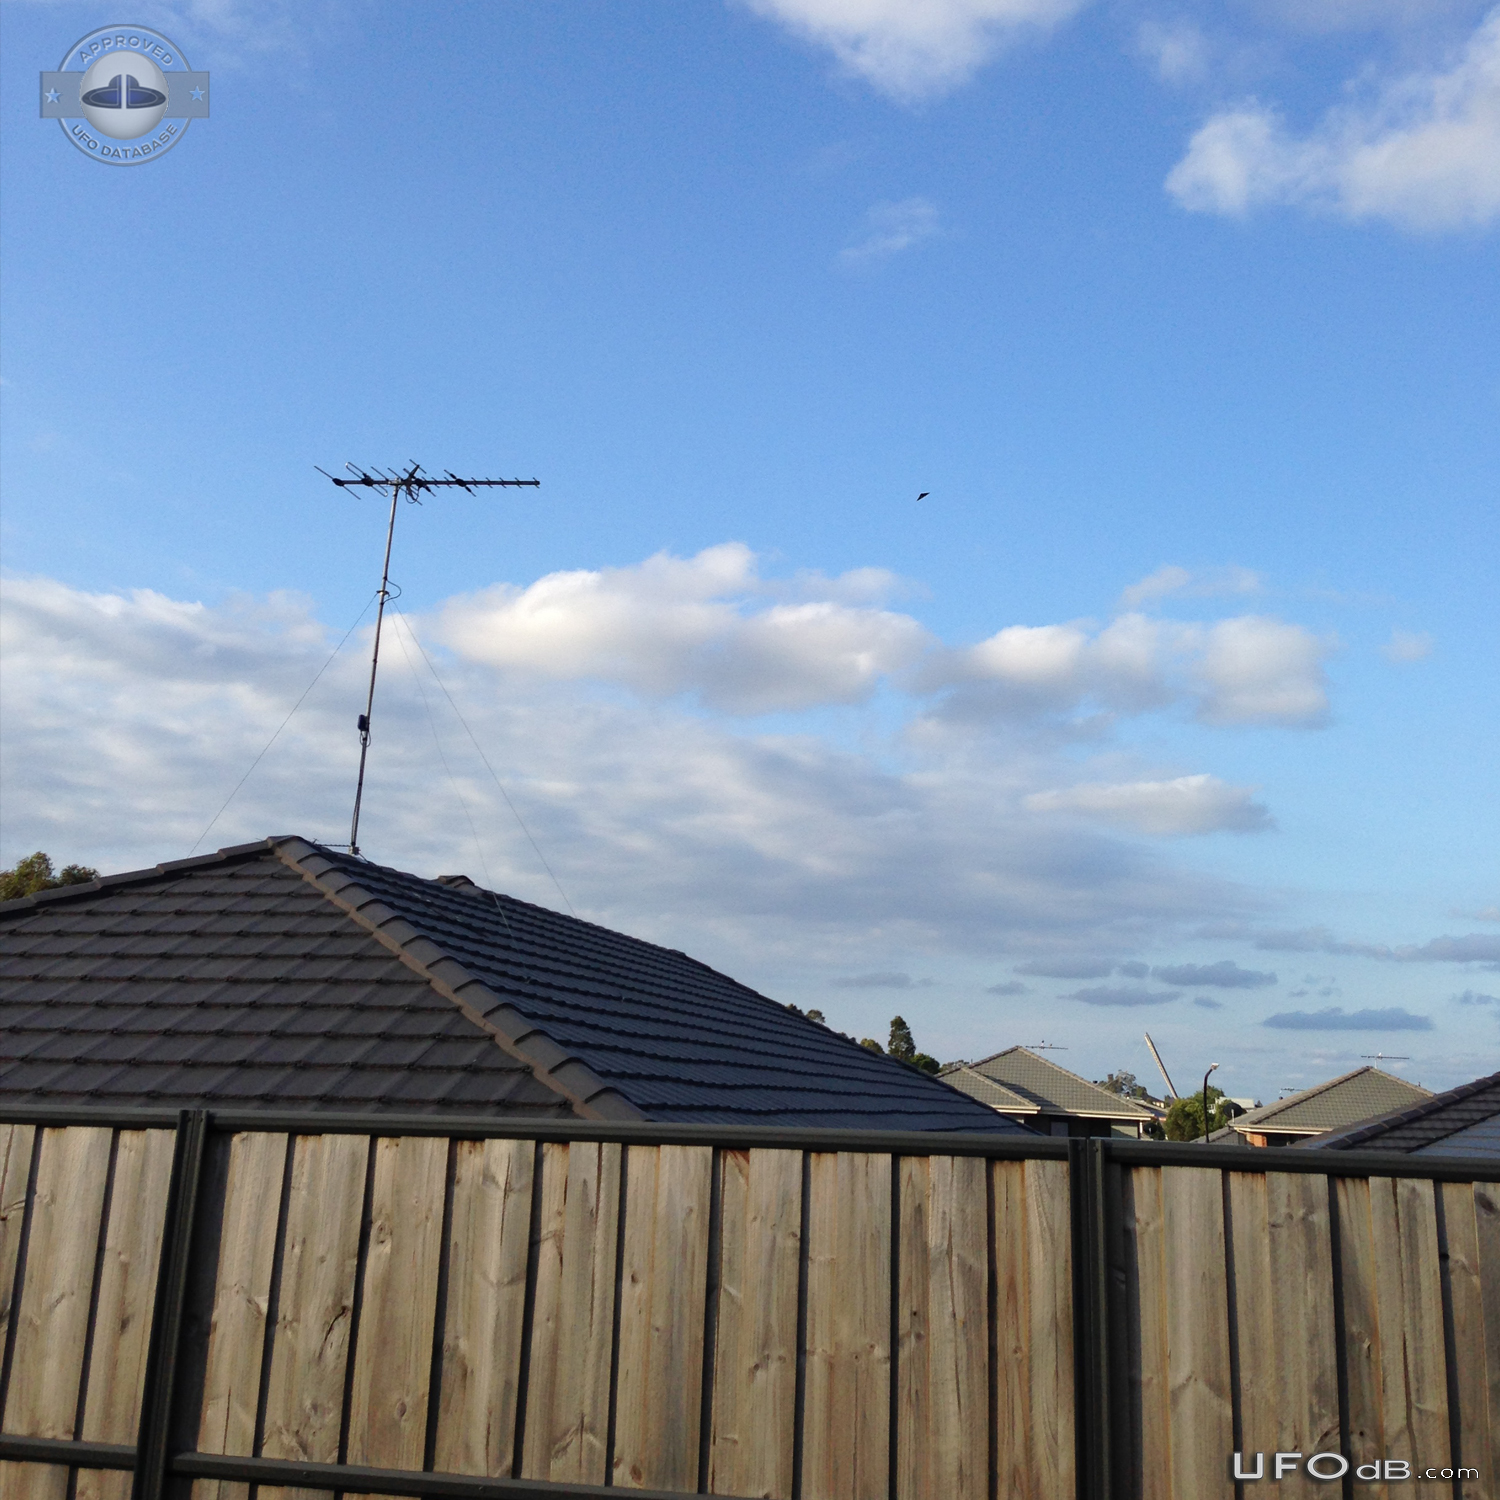 Triangular object hovering in Sky and did not move while observed - Au UFO Picture #736-1